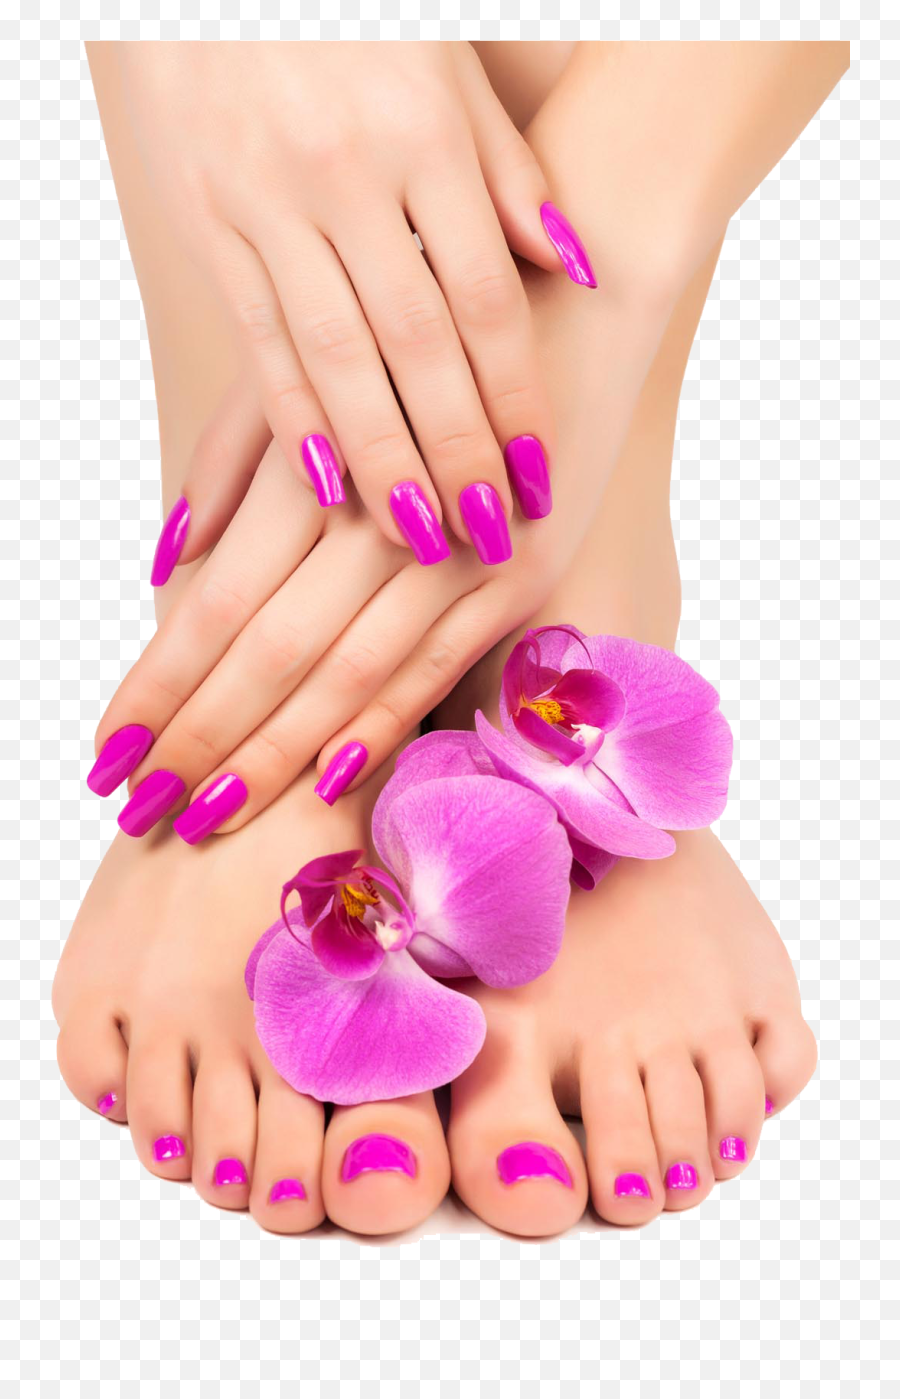 Download And Feet Close - Up Pedicure Lotion Nail Manicure Emoji,Bunny Feet Clipart